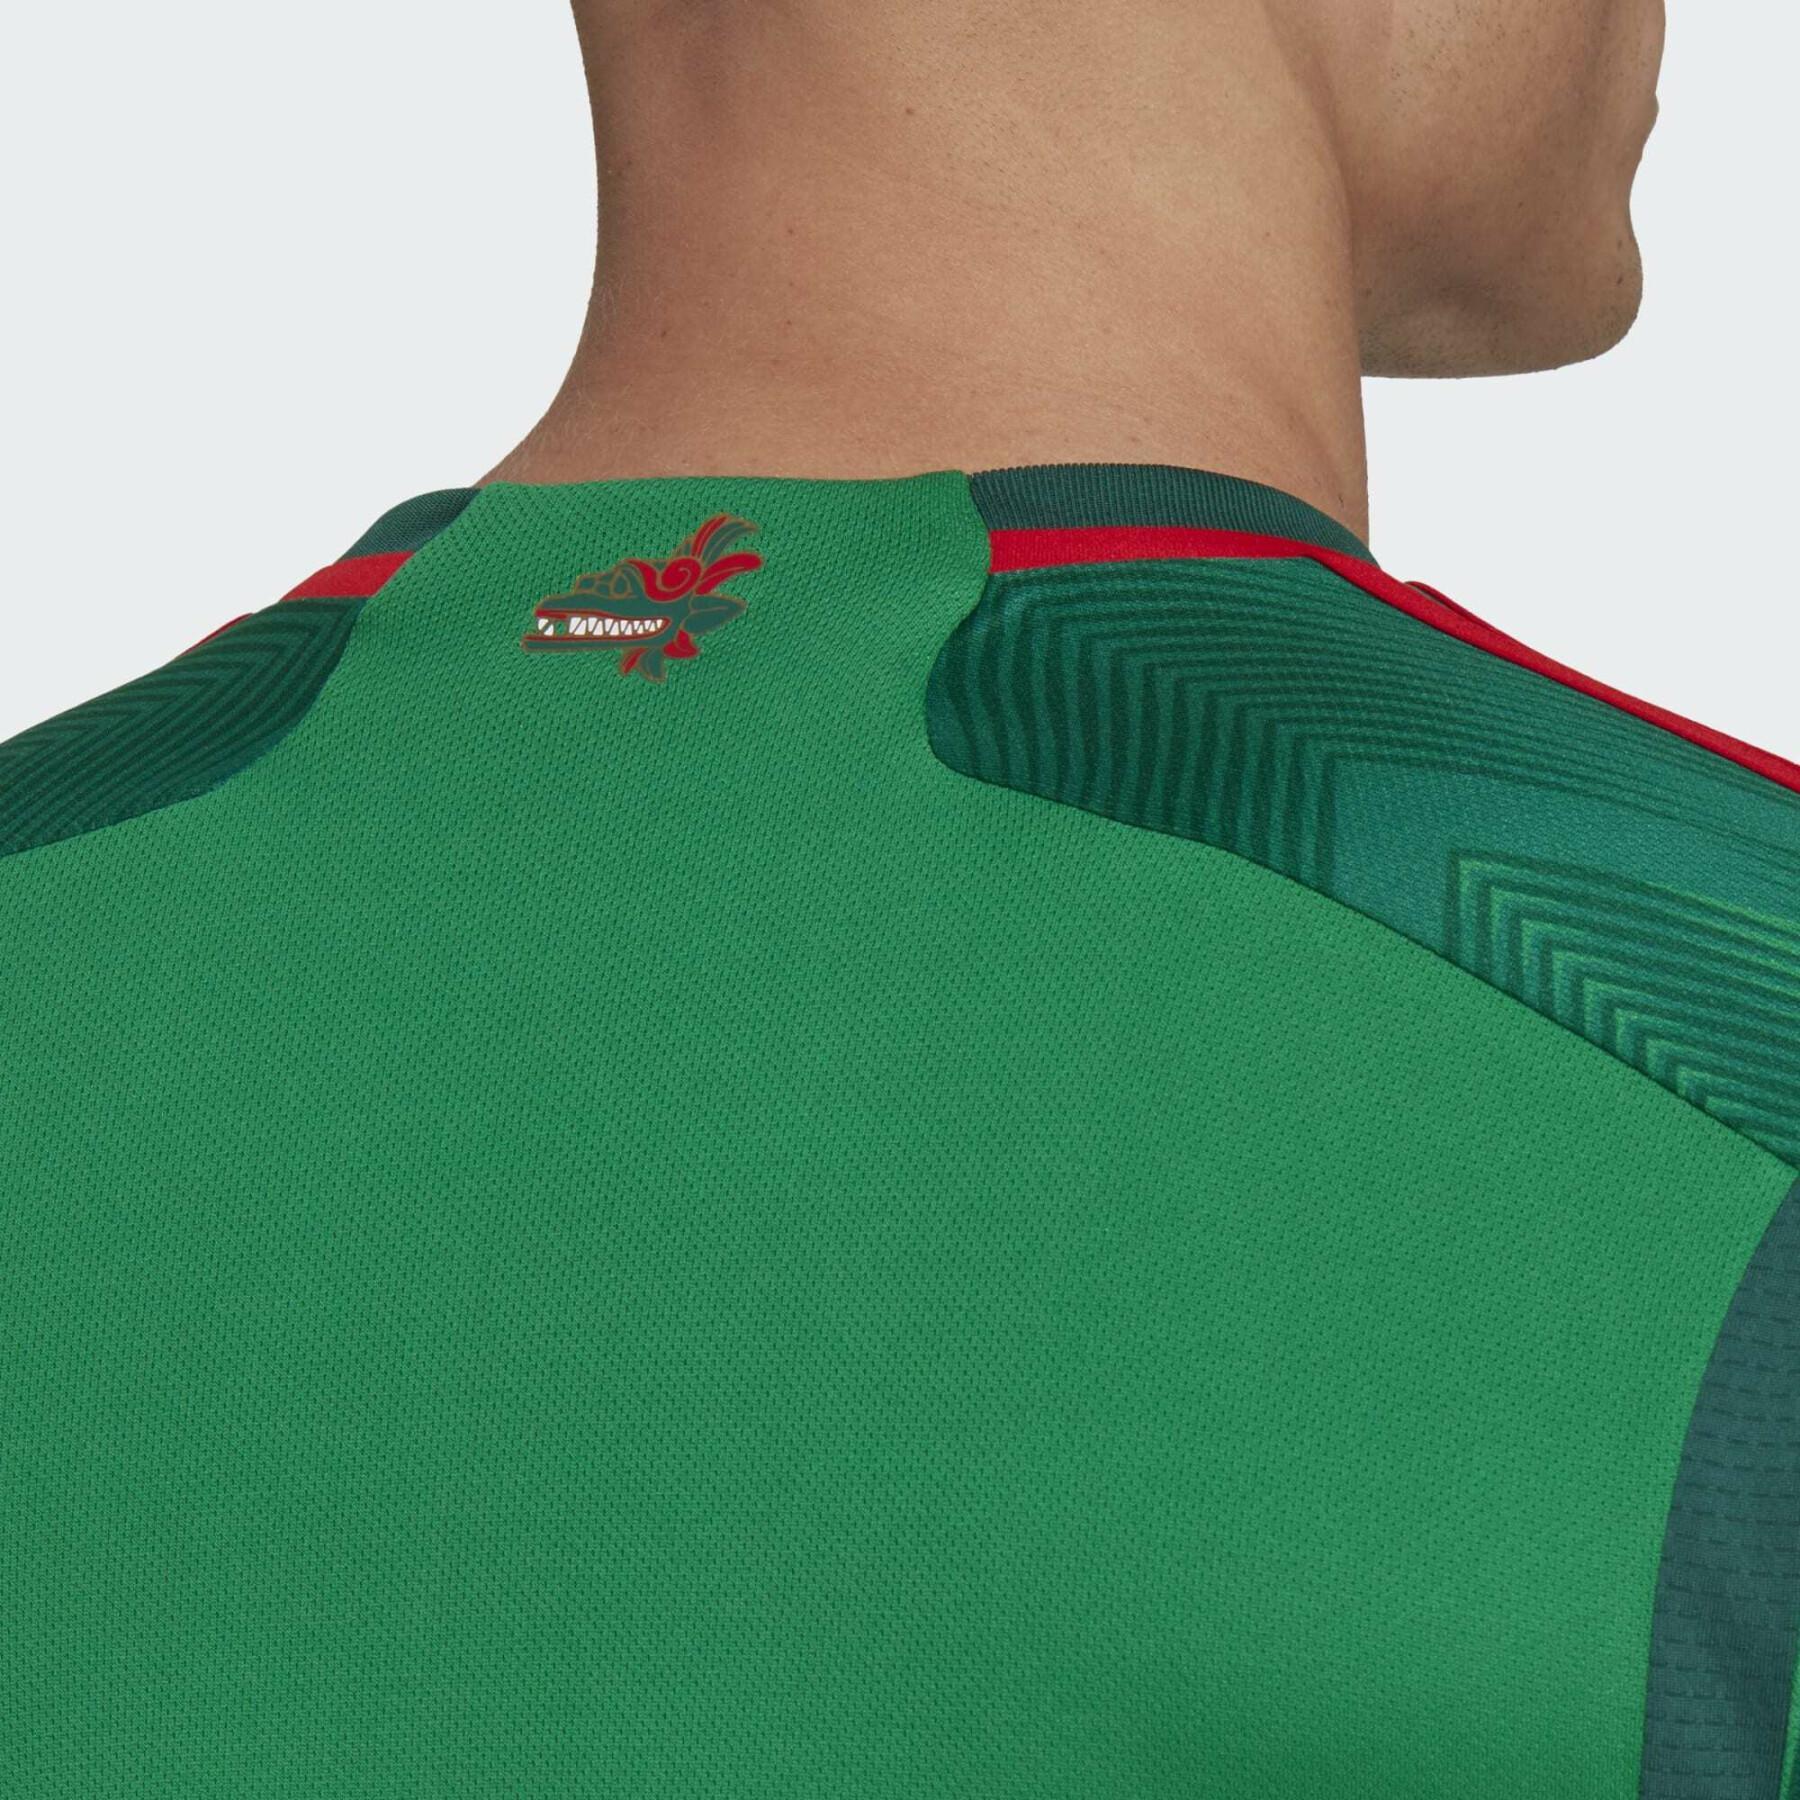 2022 World Cup home jersey Mexique